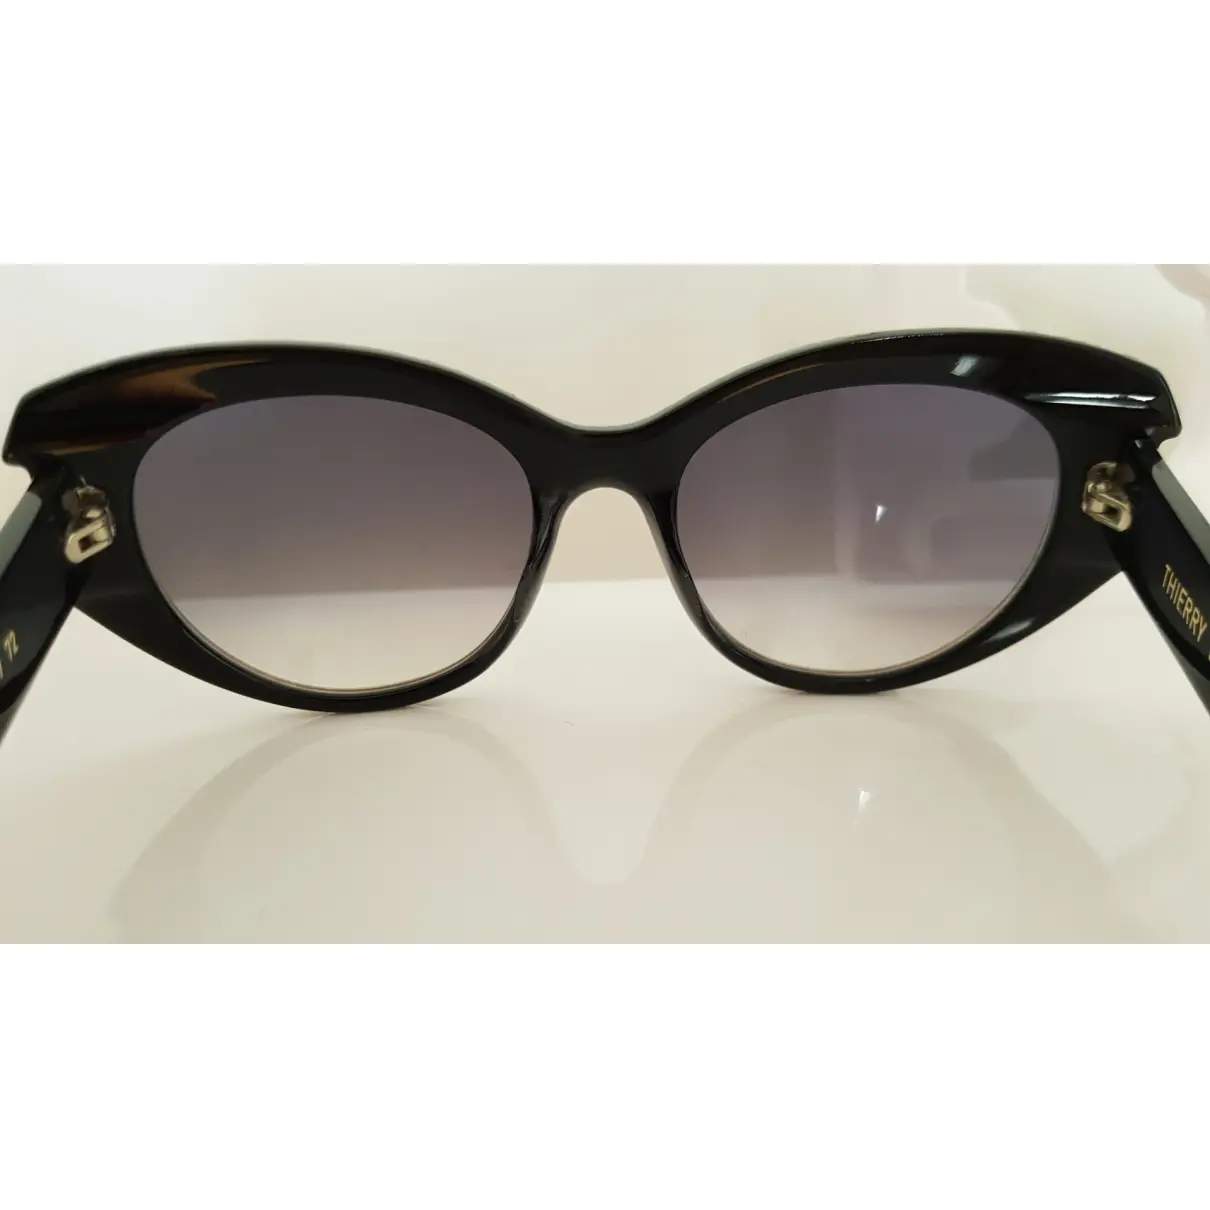 Buy Thierry Lasry Oversized sunglasses online